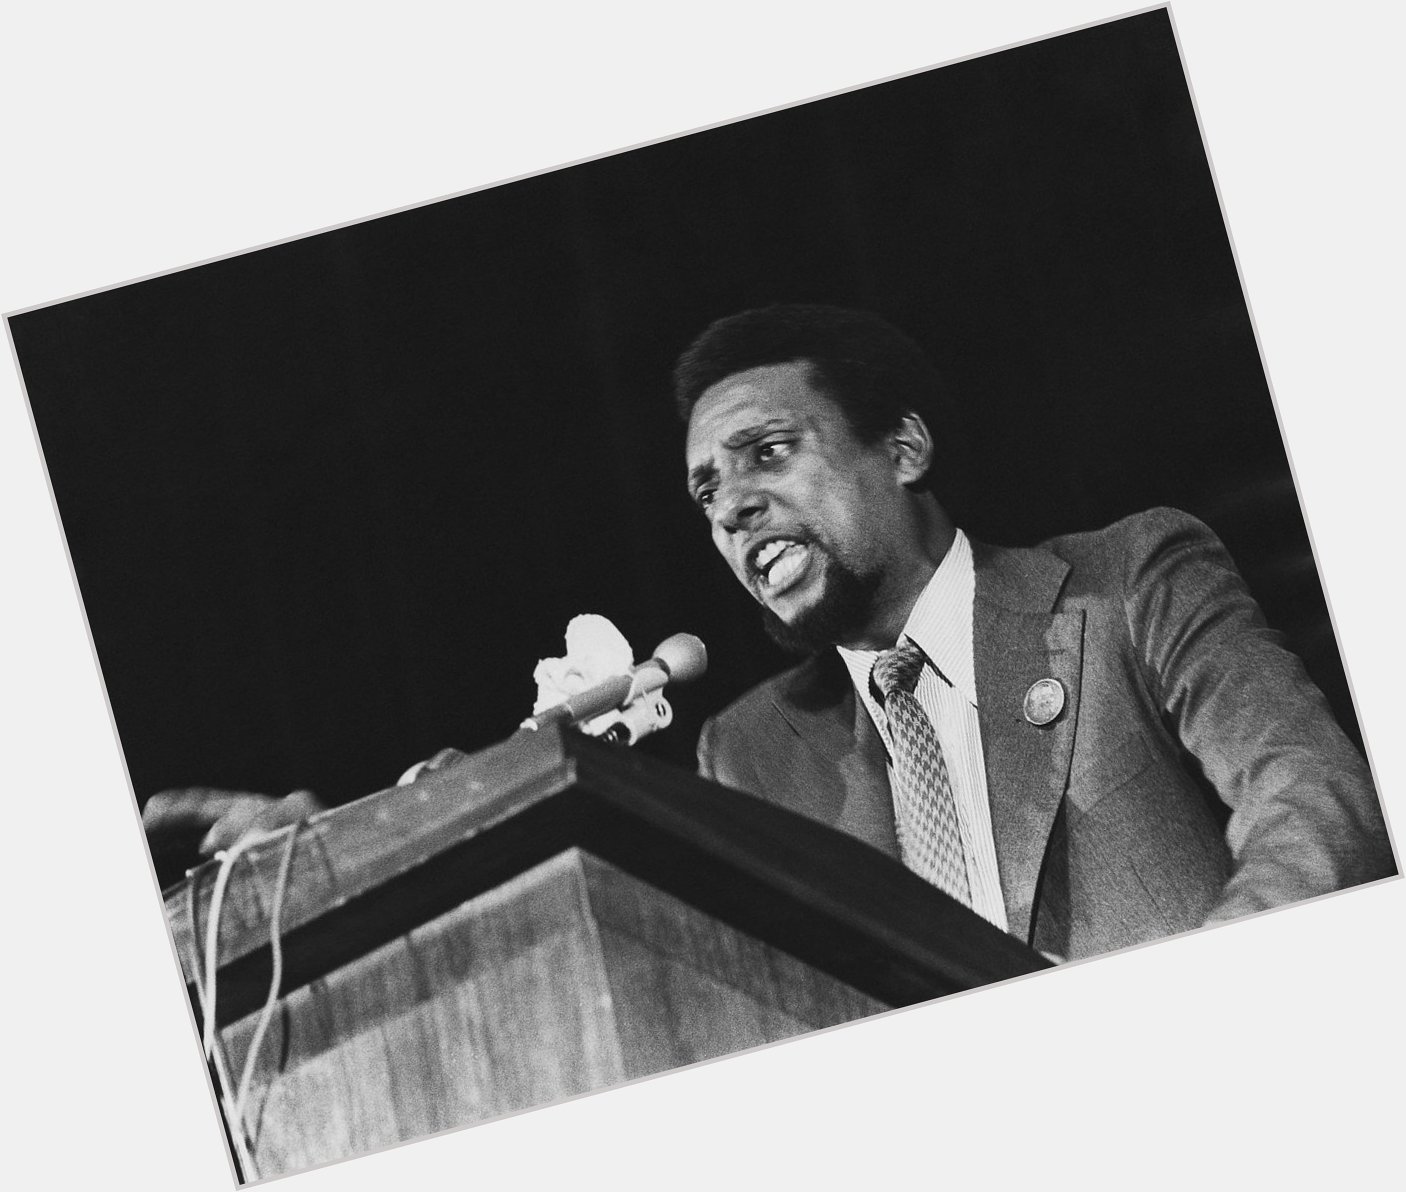 Happy Birthday to Stokely Carmichael, who would have turned 76 today! 